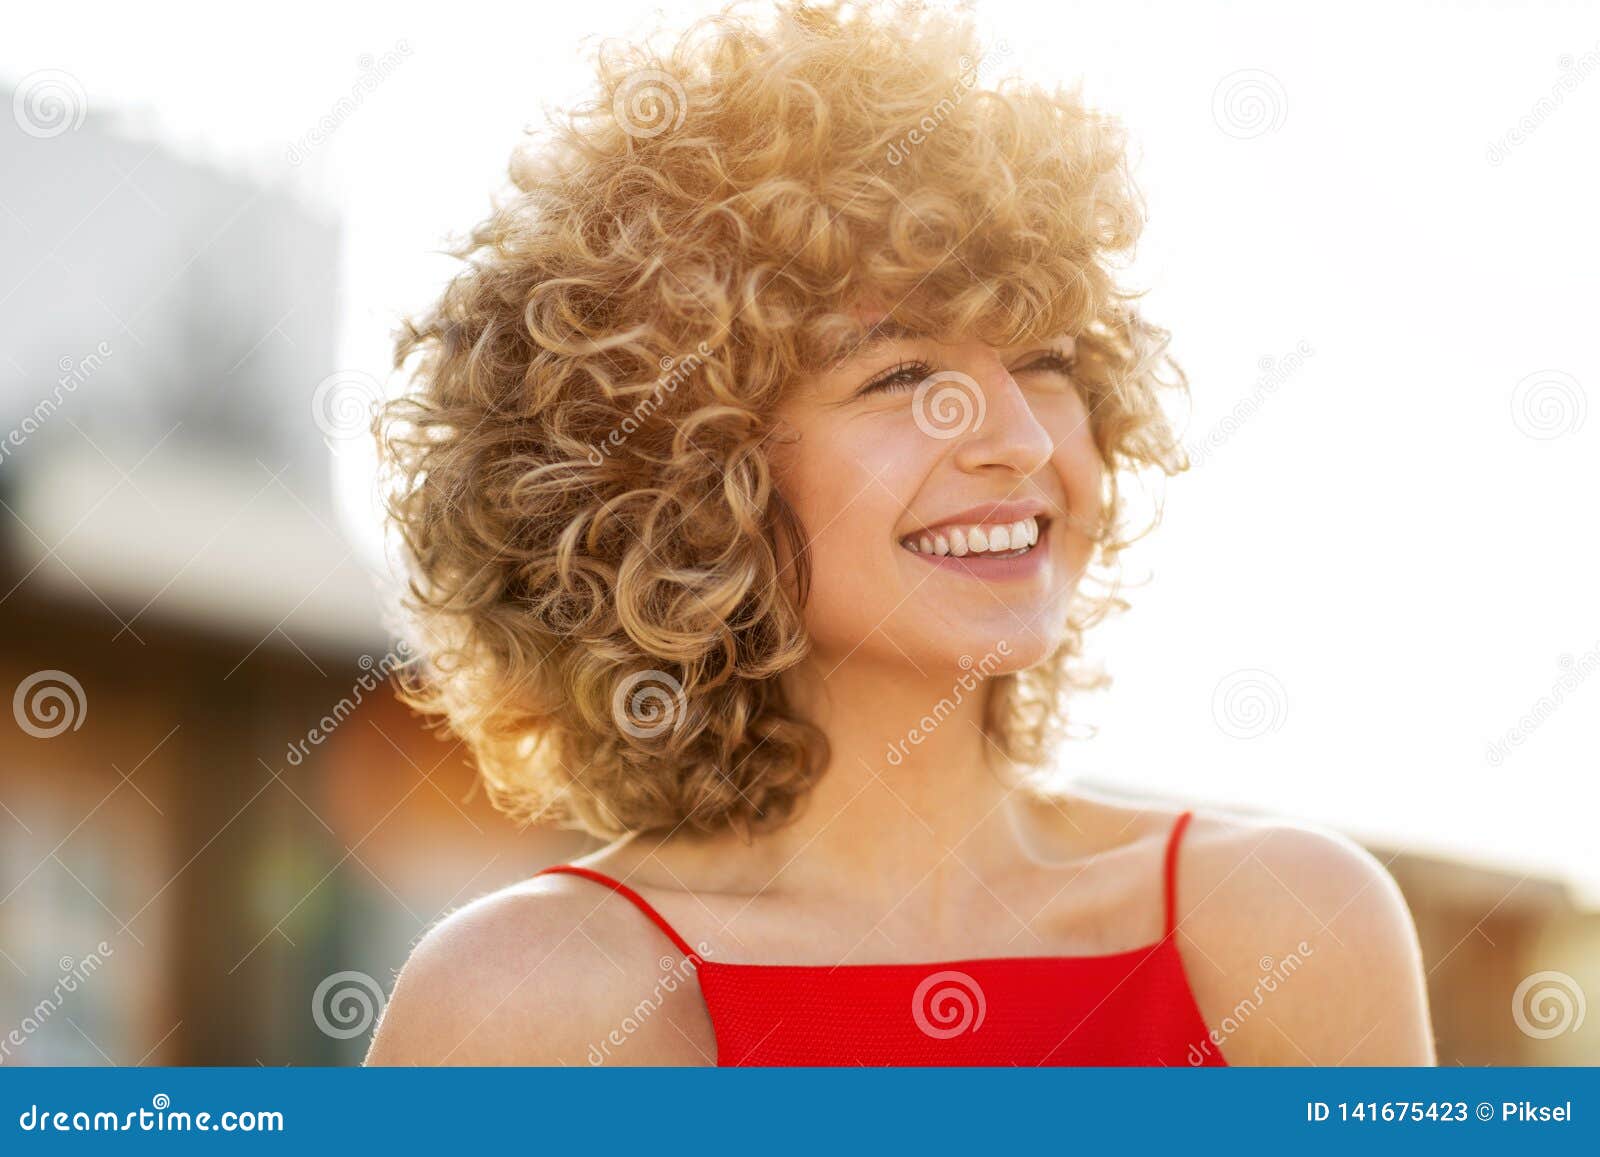 Curly hair on blond woman - wide 8